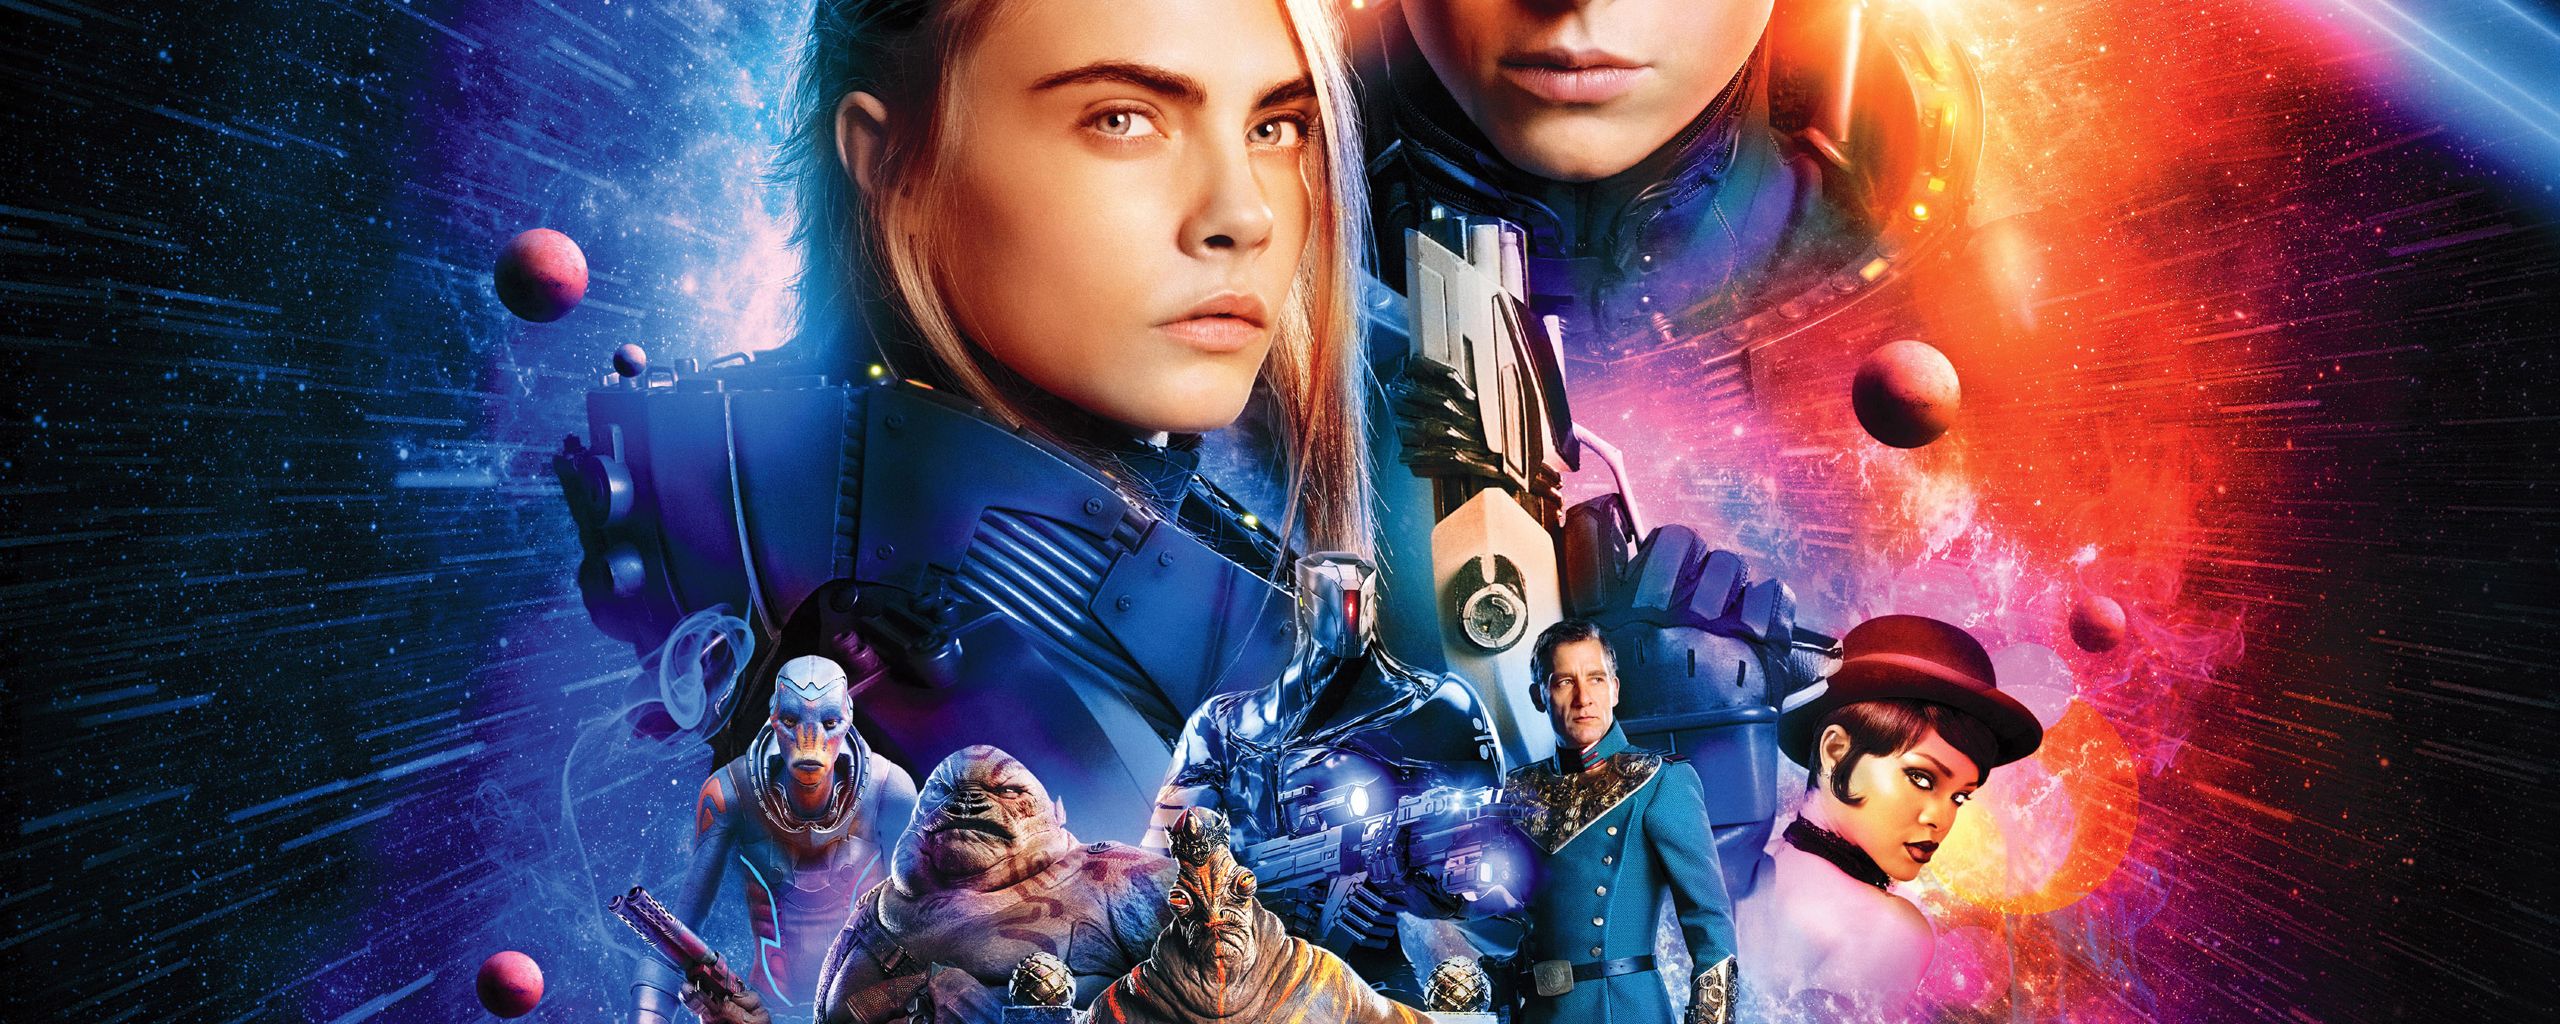 Free download Valerian and the City of a Thousand Planets Wallpaper 8 2560 X [2560x1024] for your Desktop, Mobile & Tablet. Explore Valerian And The City Of A Thousand Planets